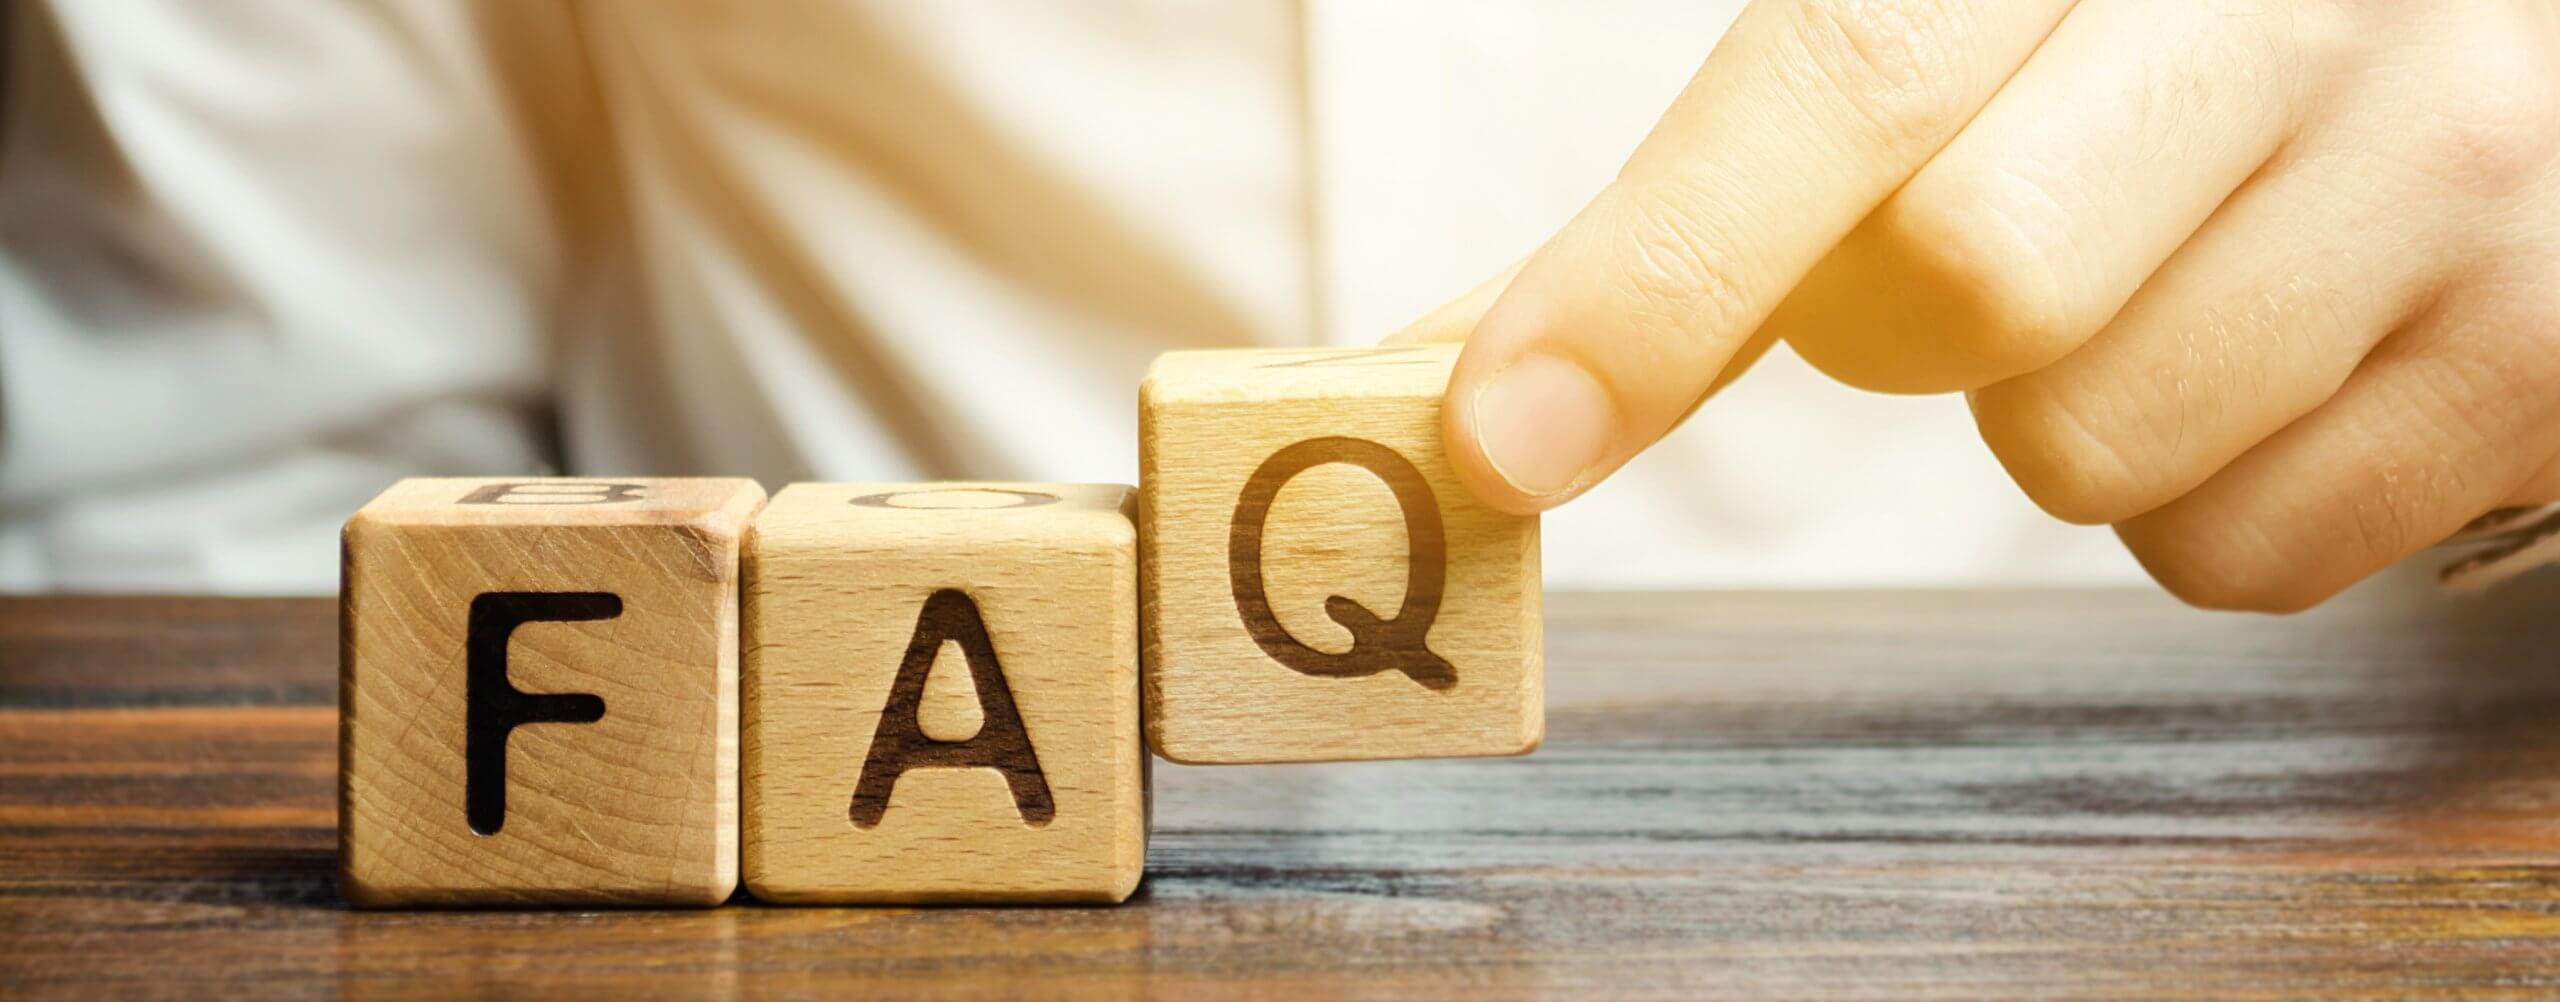 Three wooden building blocks lettered F A Q with a hand picking up the block with the letter Q.